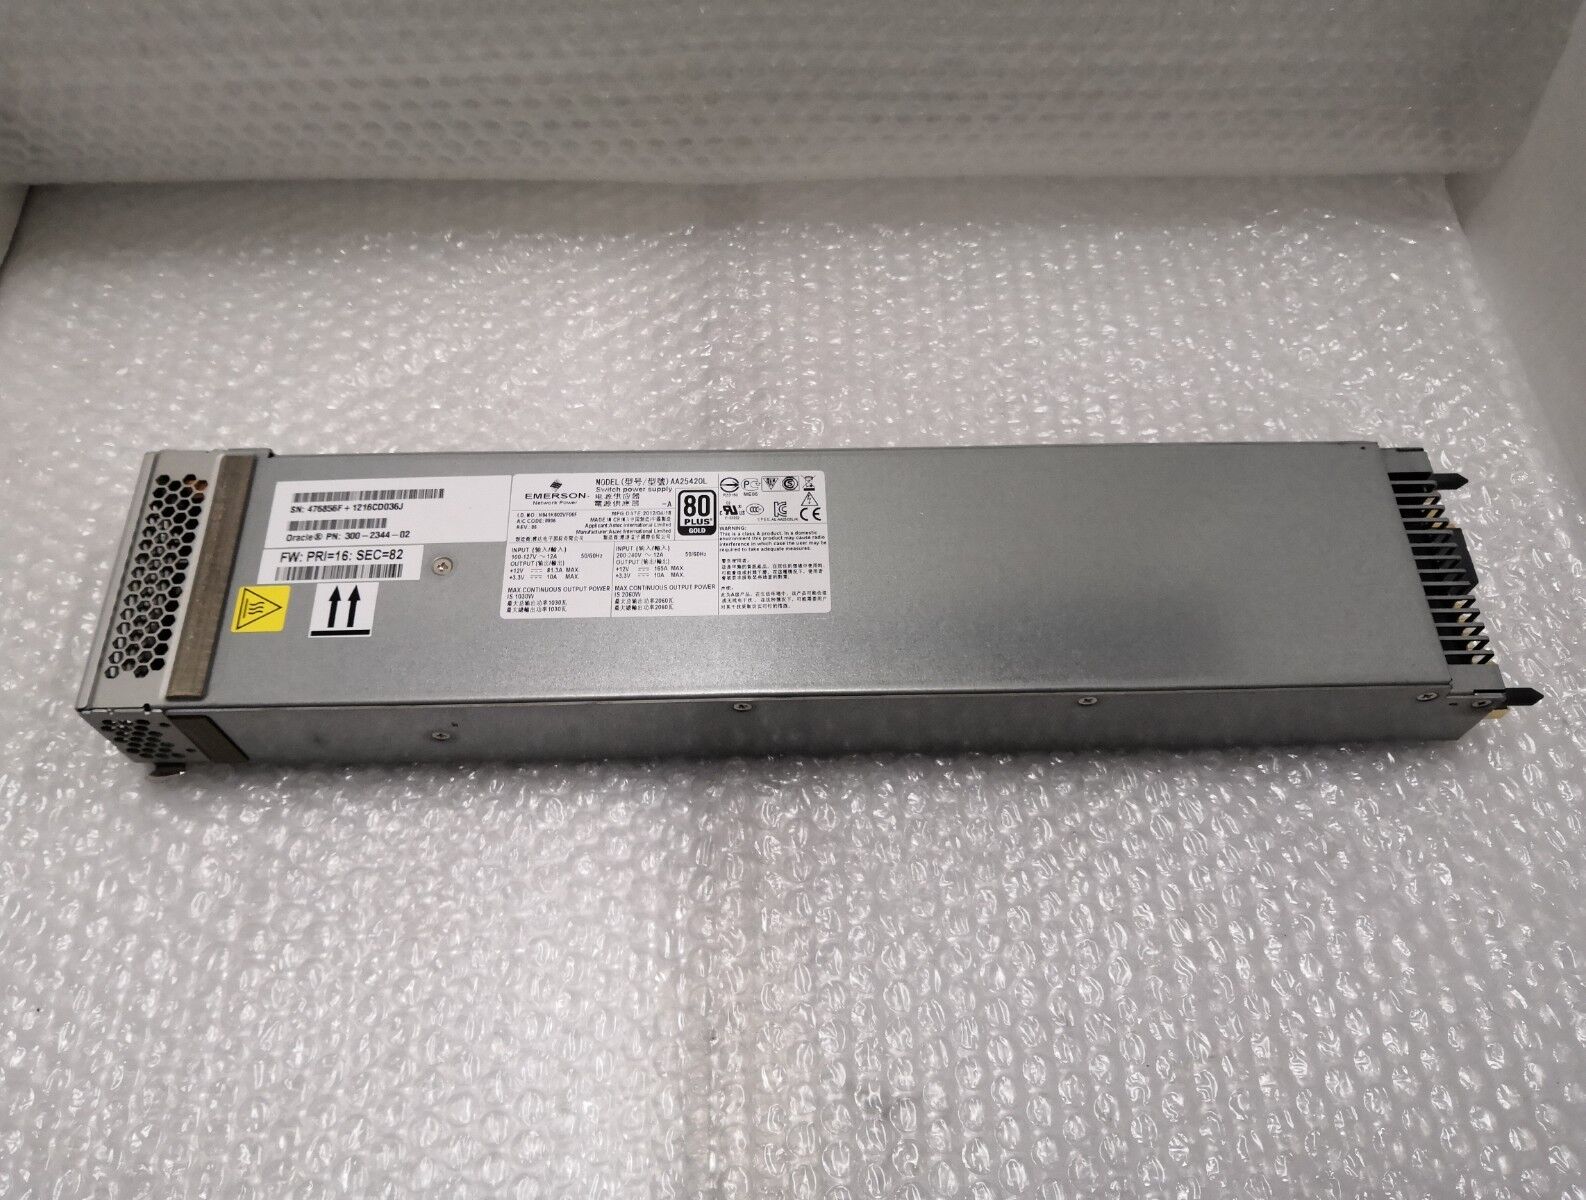 + SUN/ORACLE 300-2159 Emerson AA25420L 1030/2060W PS Power Supply 1030/2060w 